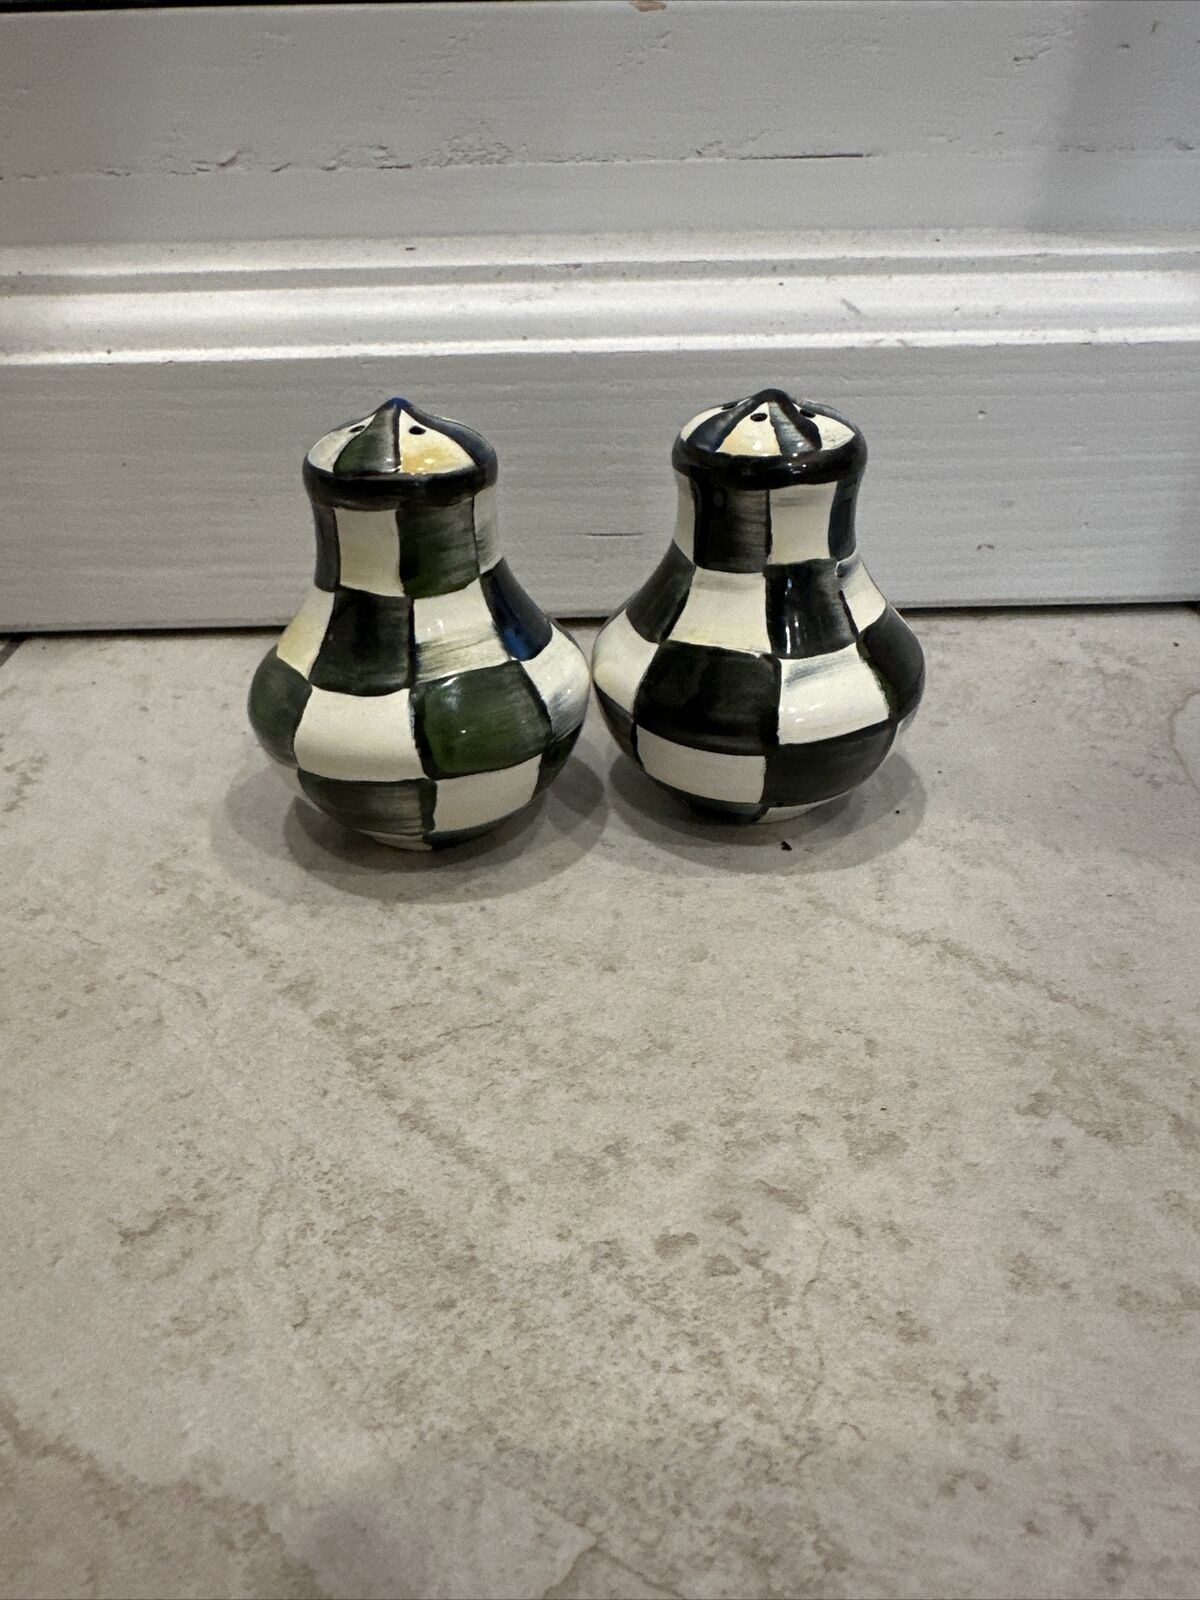 Mackenzie Childs Courtly Check Salt and Pepper Shaker Set